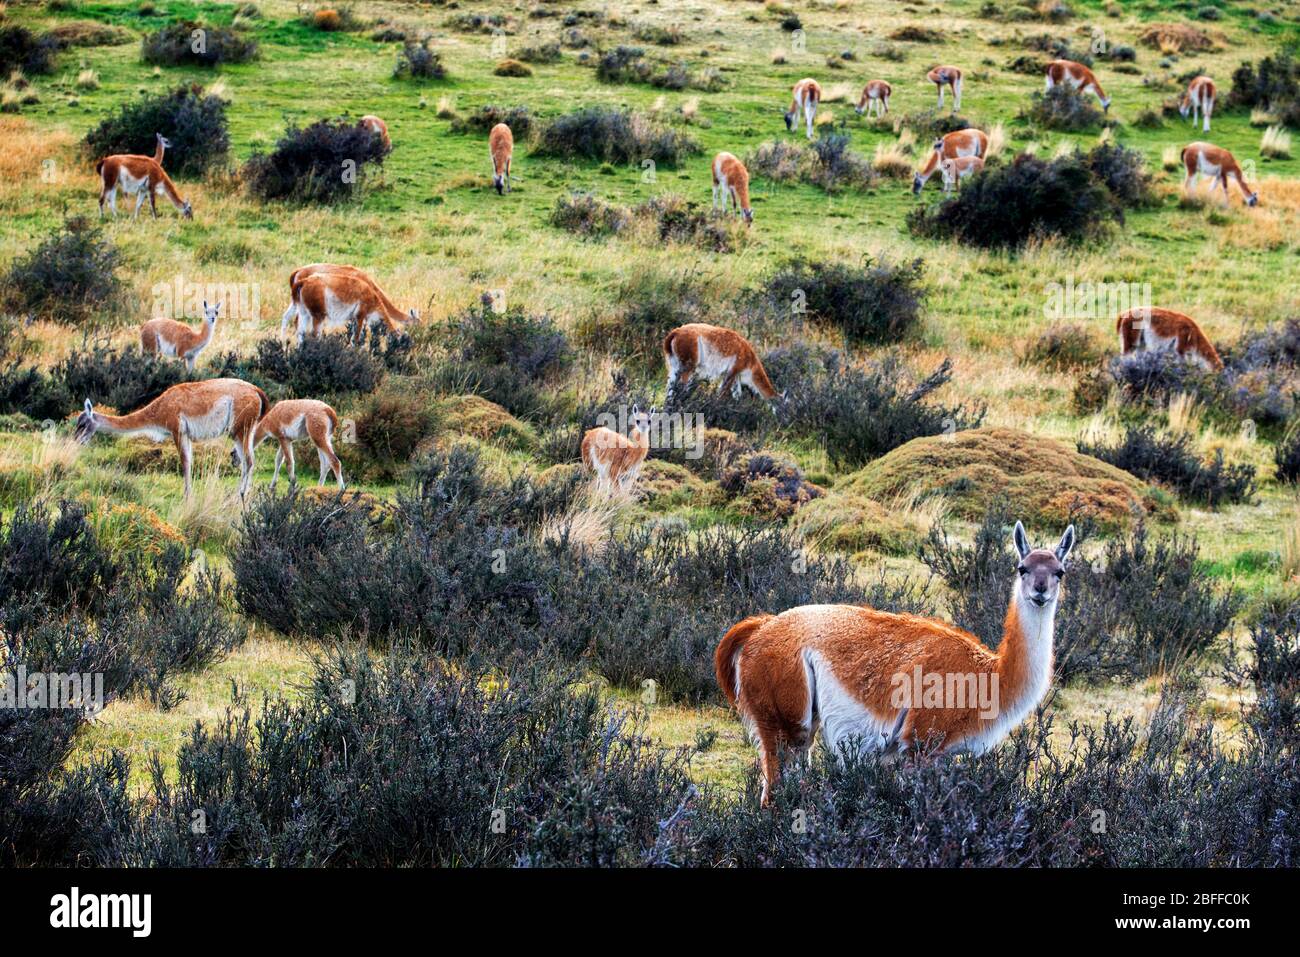 Small herd of Guanacos Lama guanicoe in Torres del Paine National Park Puerto Natales, Ultima Esperanza Province, Patagonia, Chile. Stock Photo